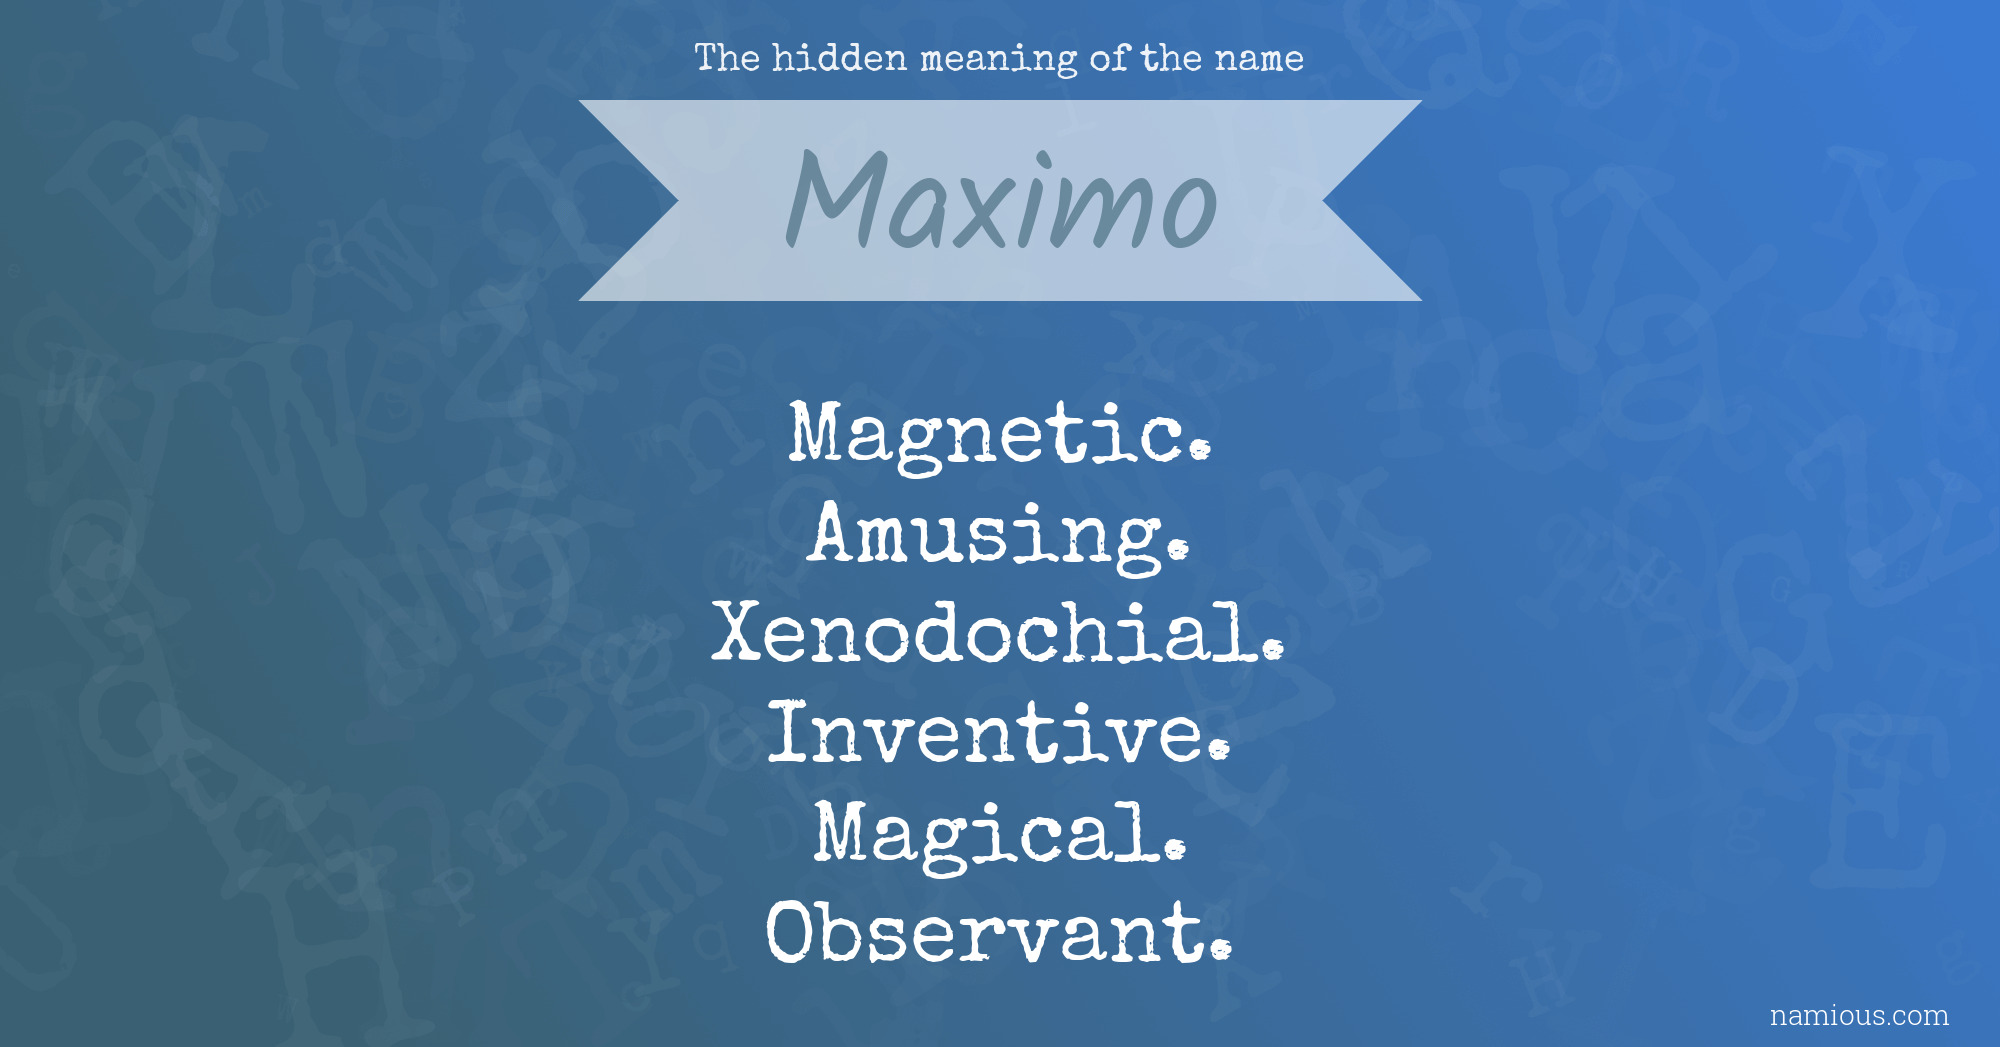 The hidden meaning of the name Maximo